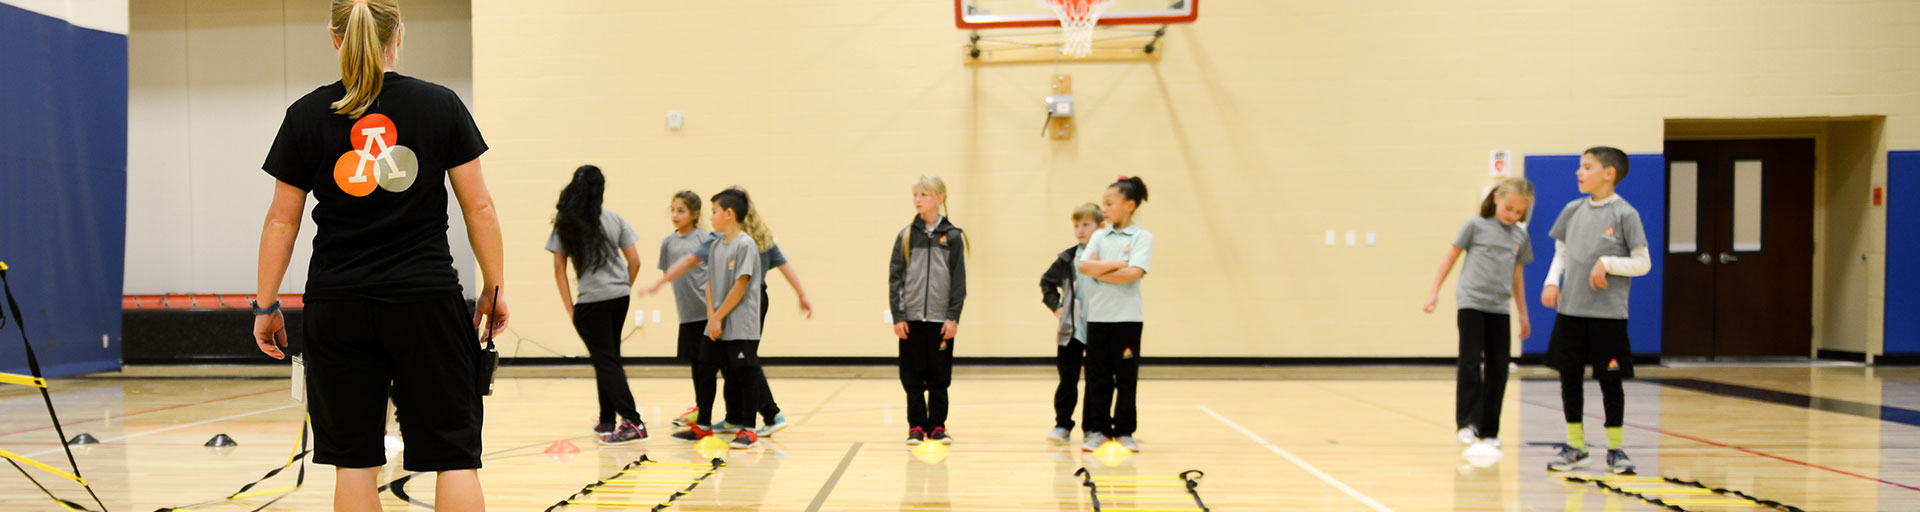 Students participate in athletic movement class